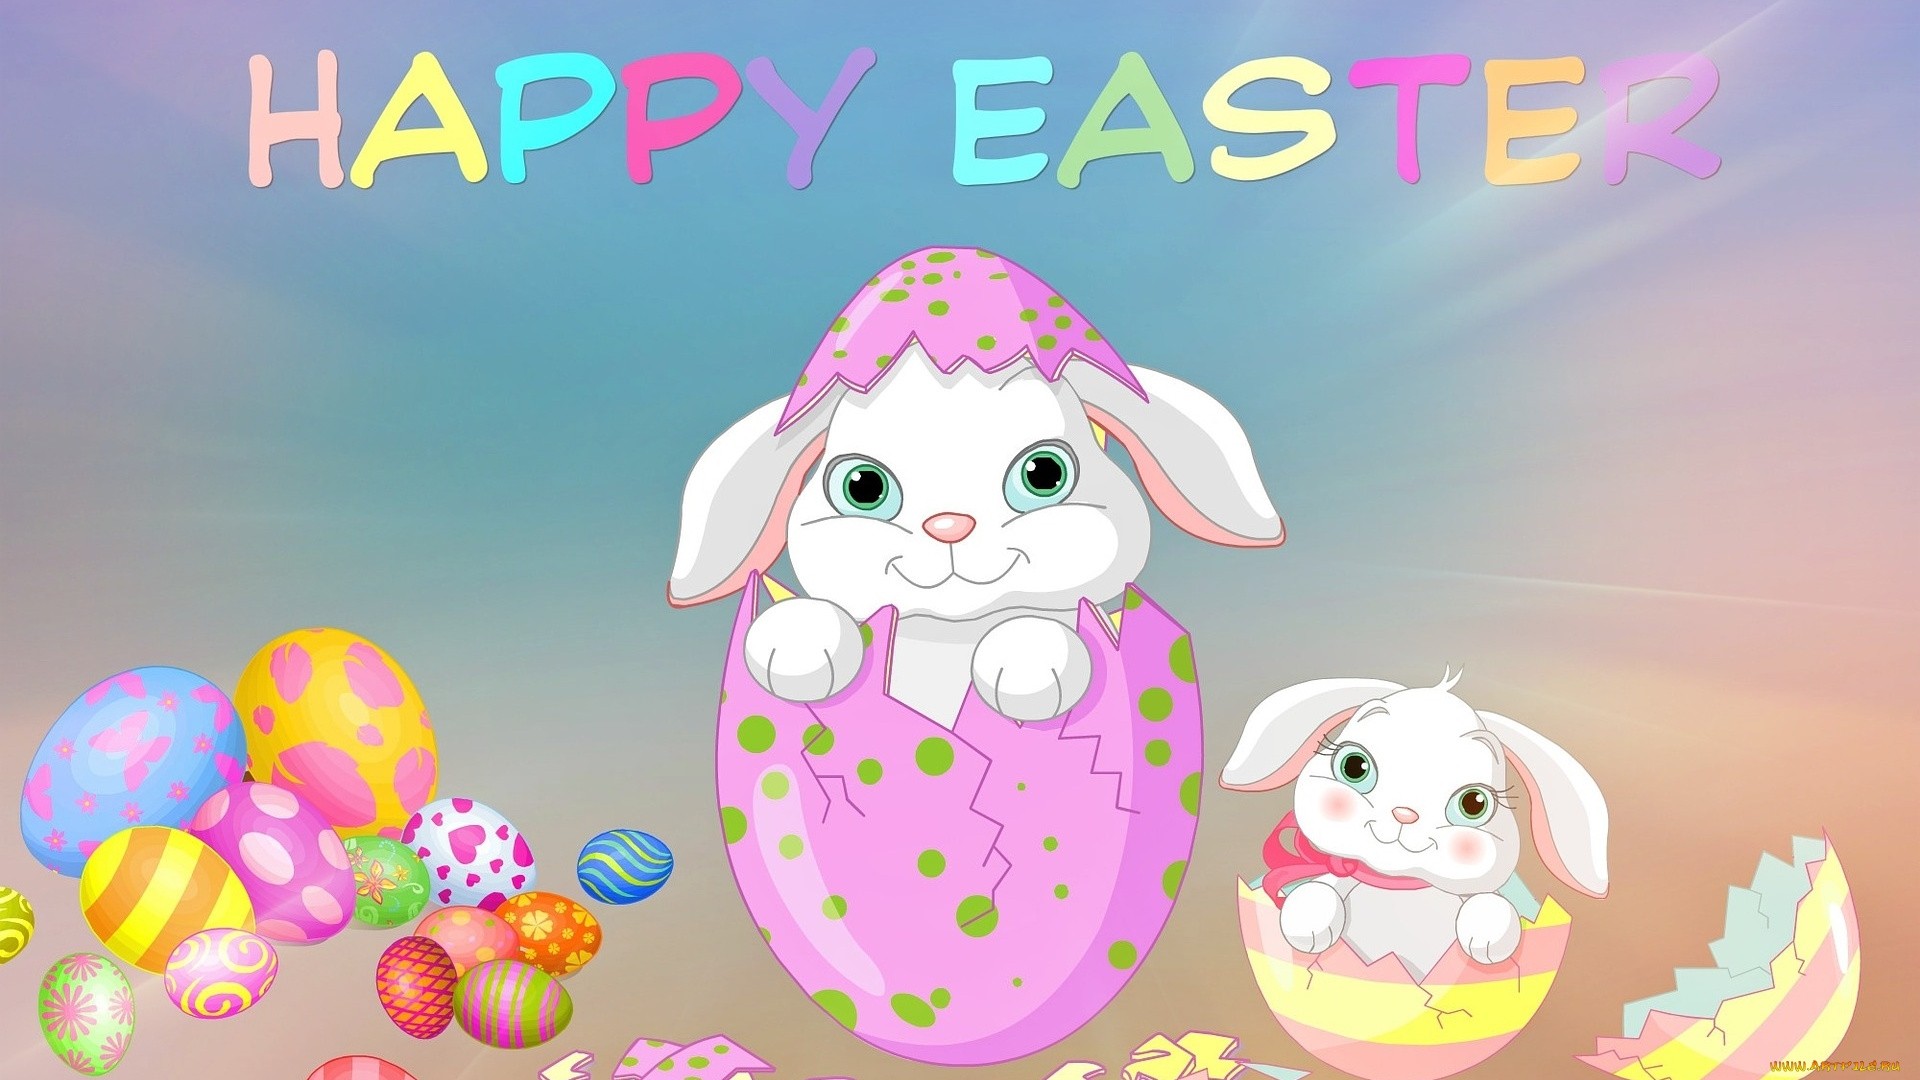 Happy Easter Image Full HD